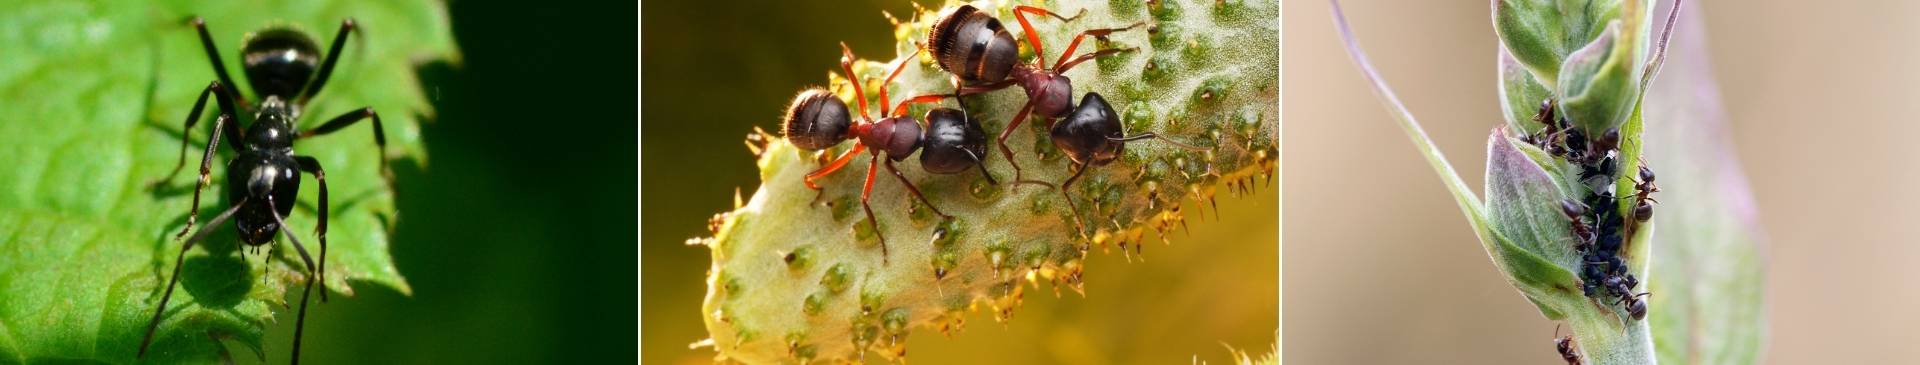 Ants in the Garden: a Mixture of Friend and Foe